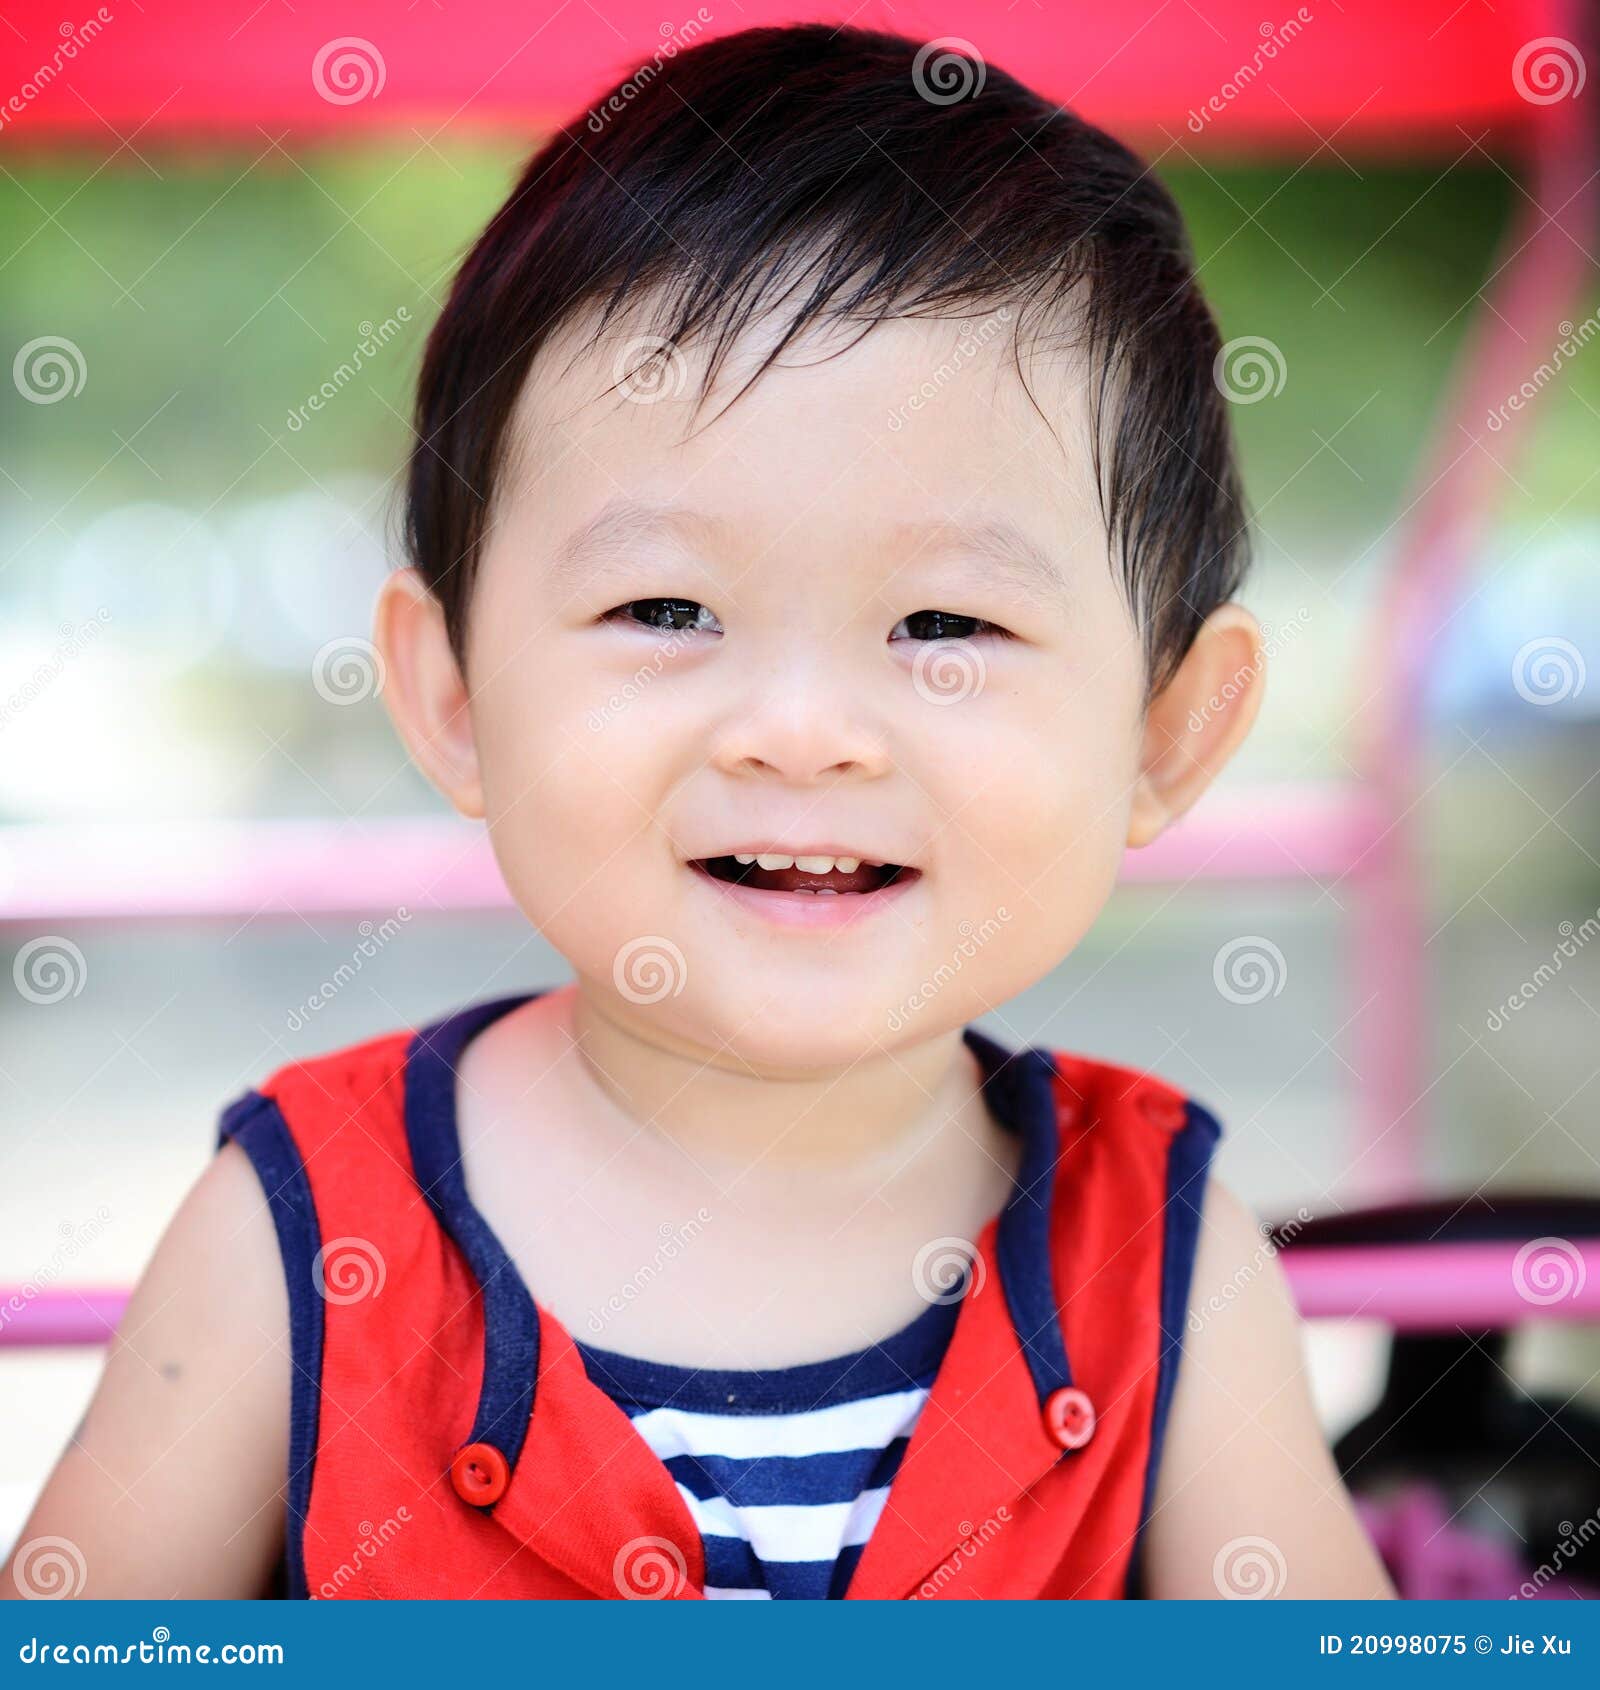 Cute Chinese boy portrait stock image. Image of toddler - 20998075 image